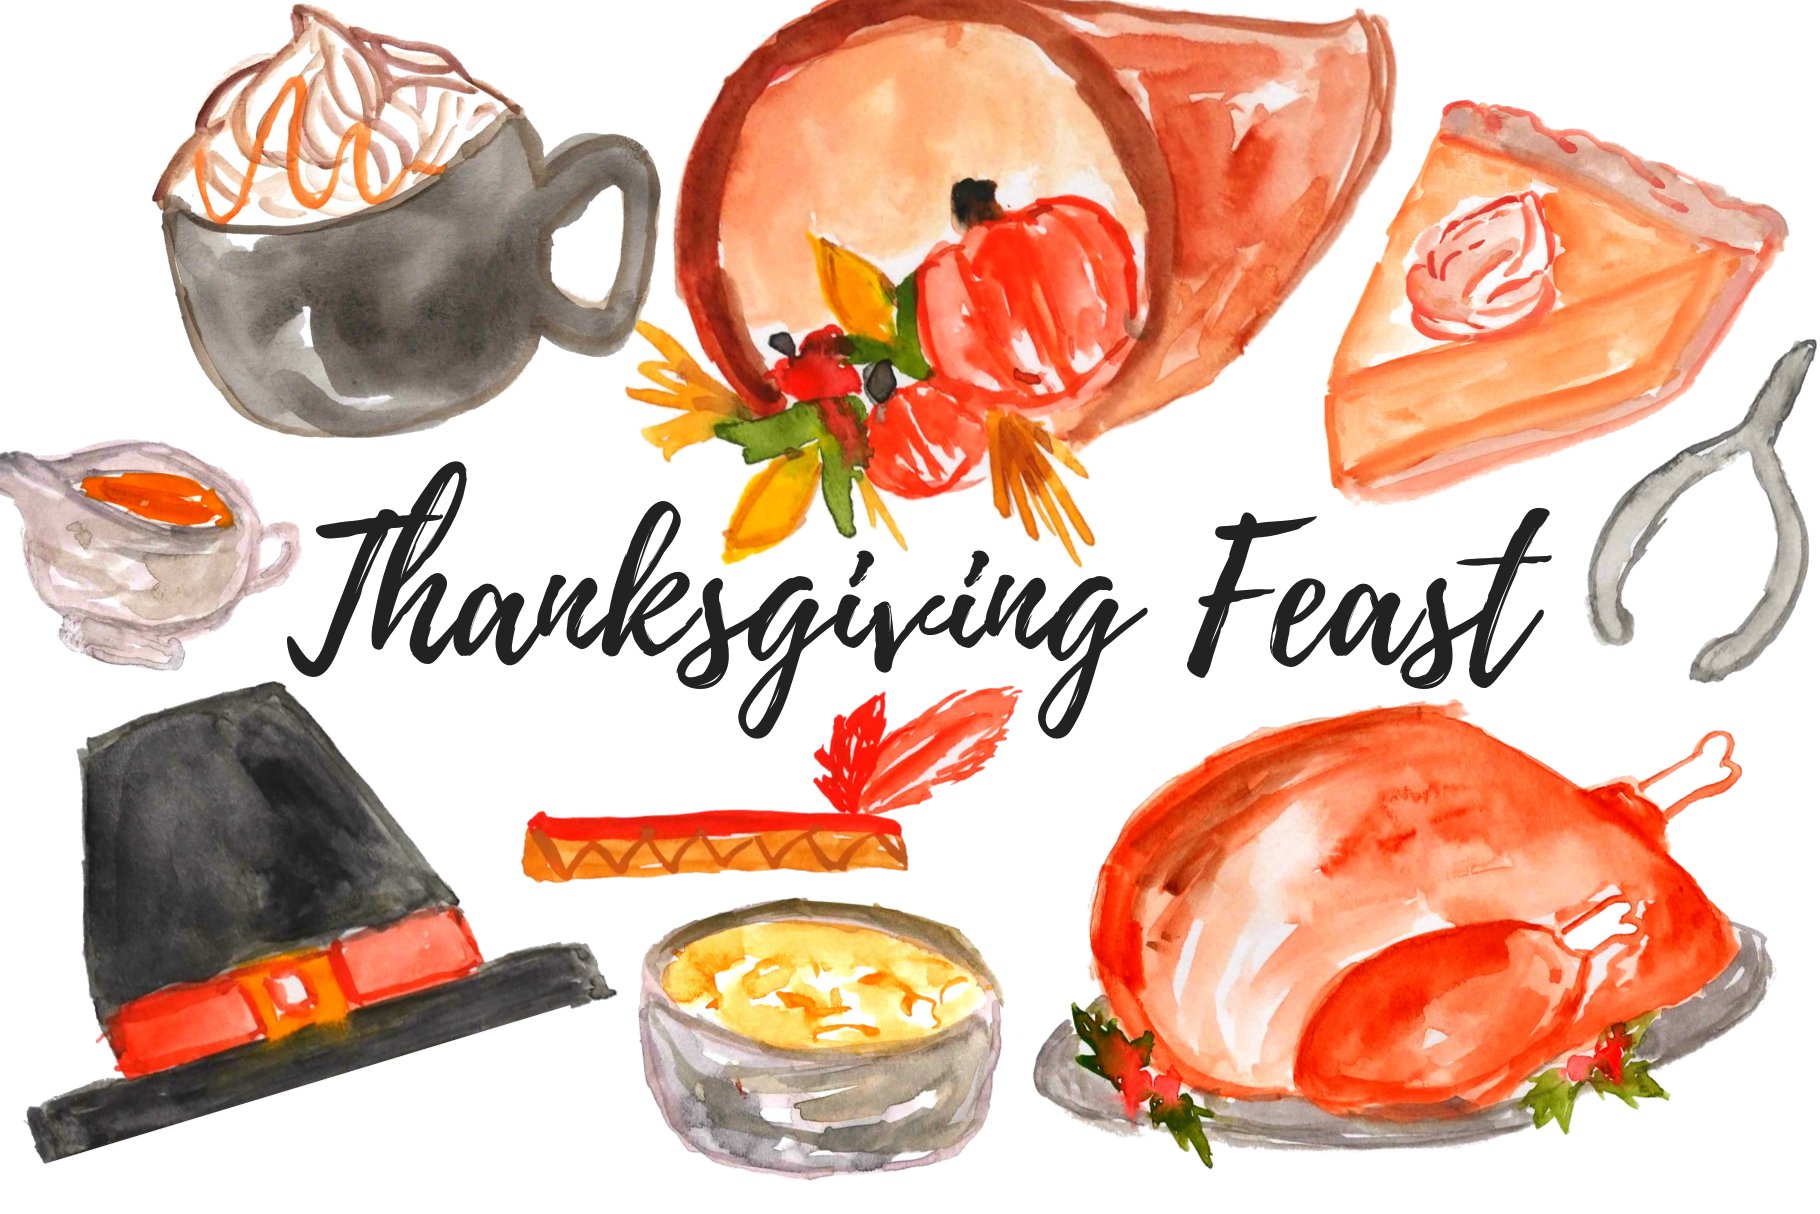 Thanksgiving feast in a watercolor.